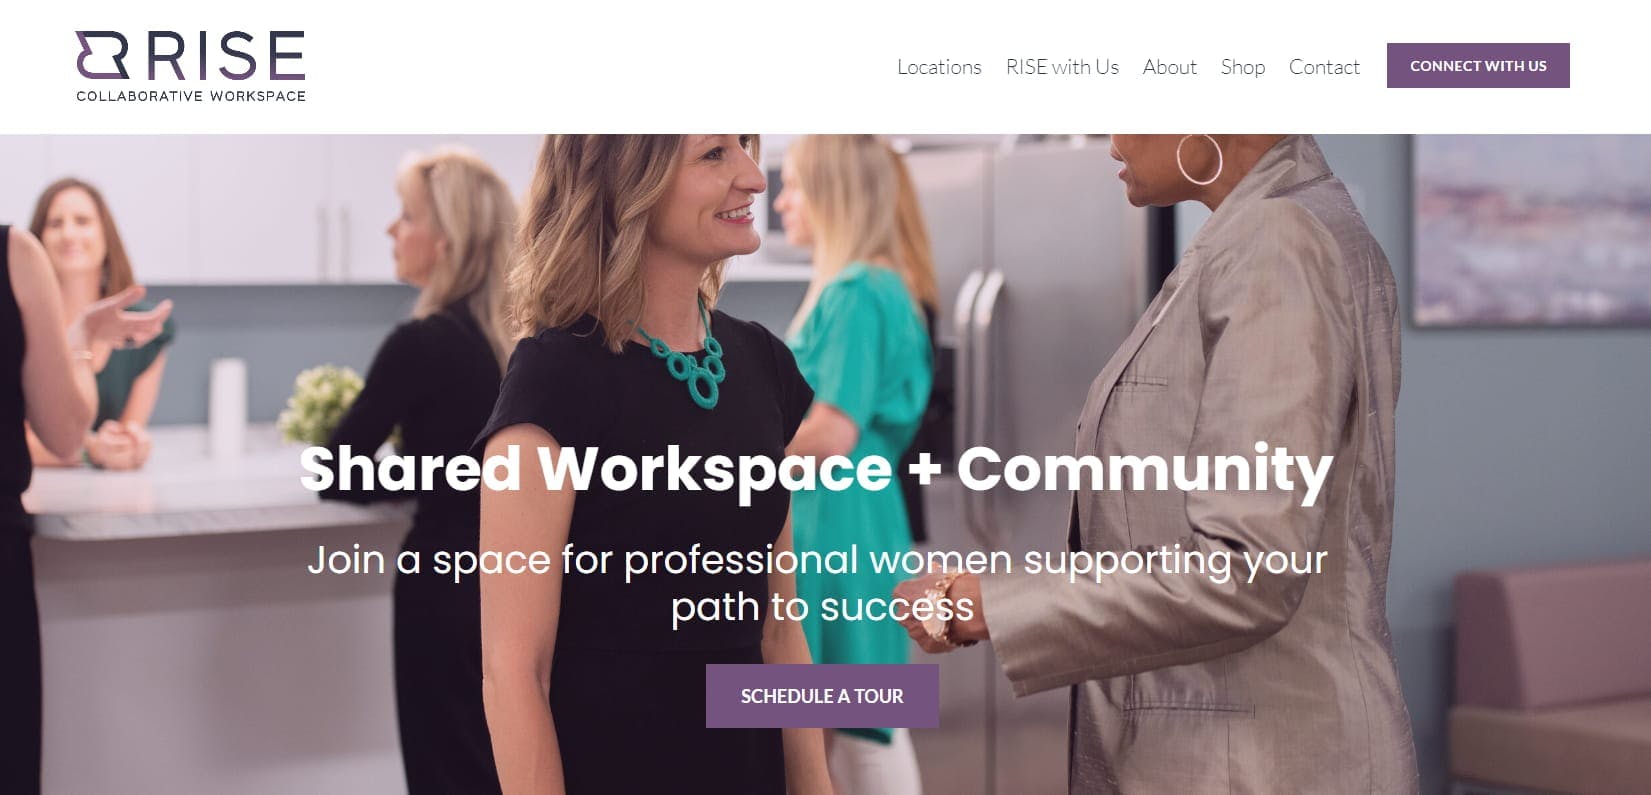 Rise collaborative workspace - home page of the corporate coworking space website